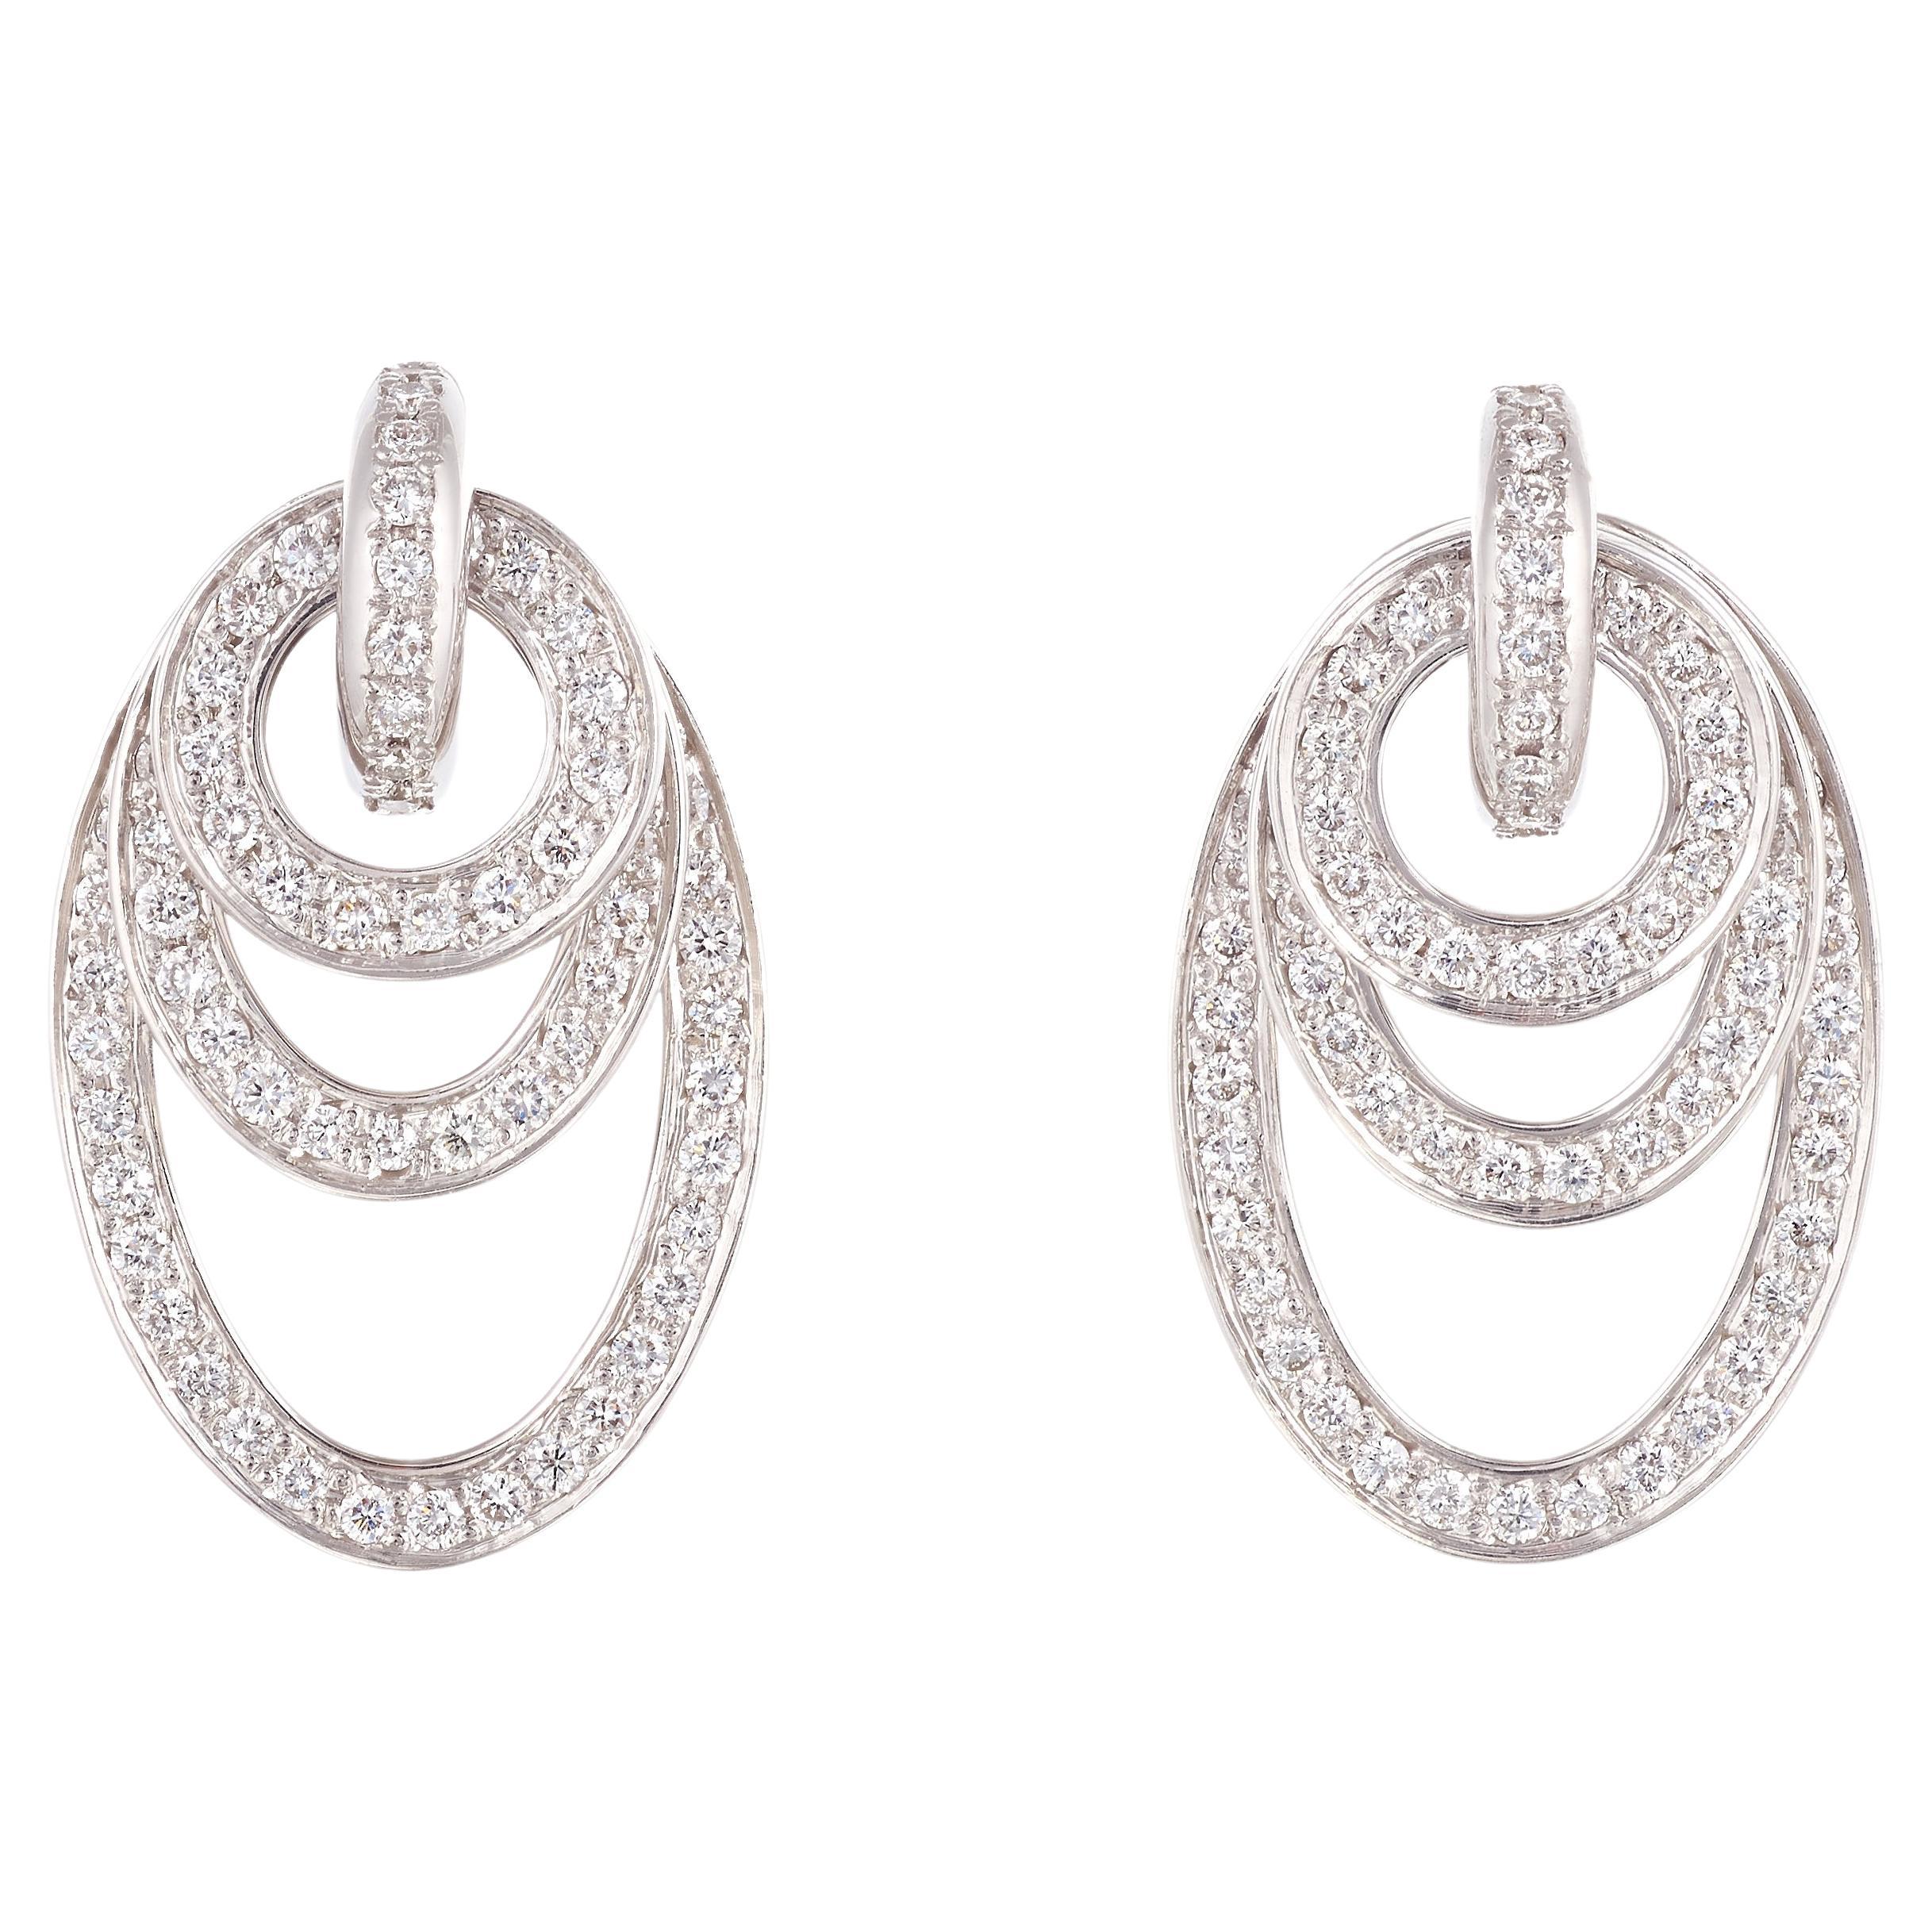 Rosior Contemporary Dangle Earrings Set in White Gold with Diamonds